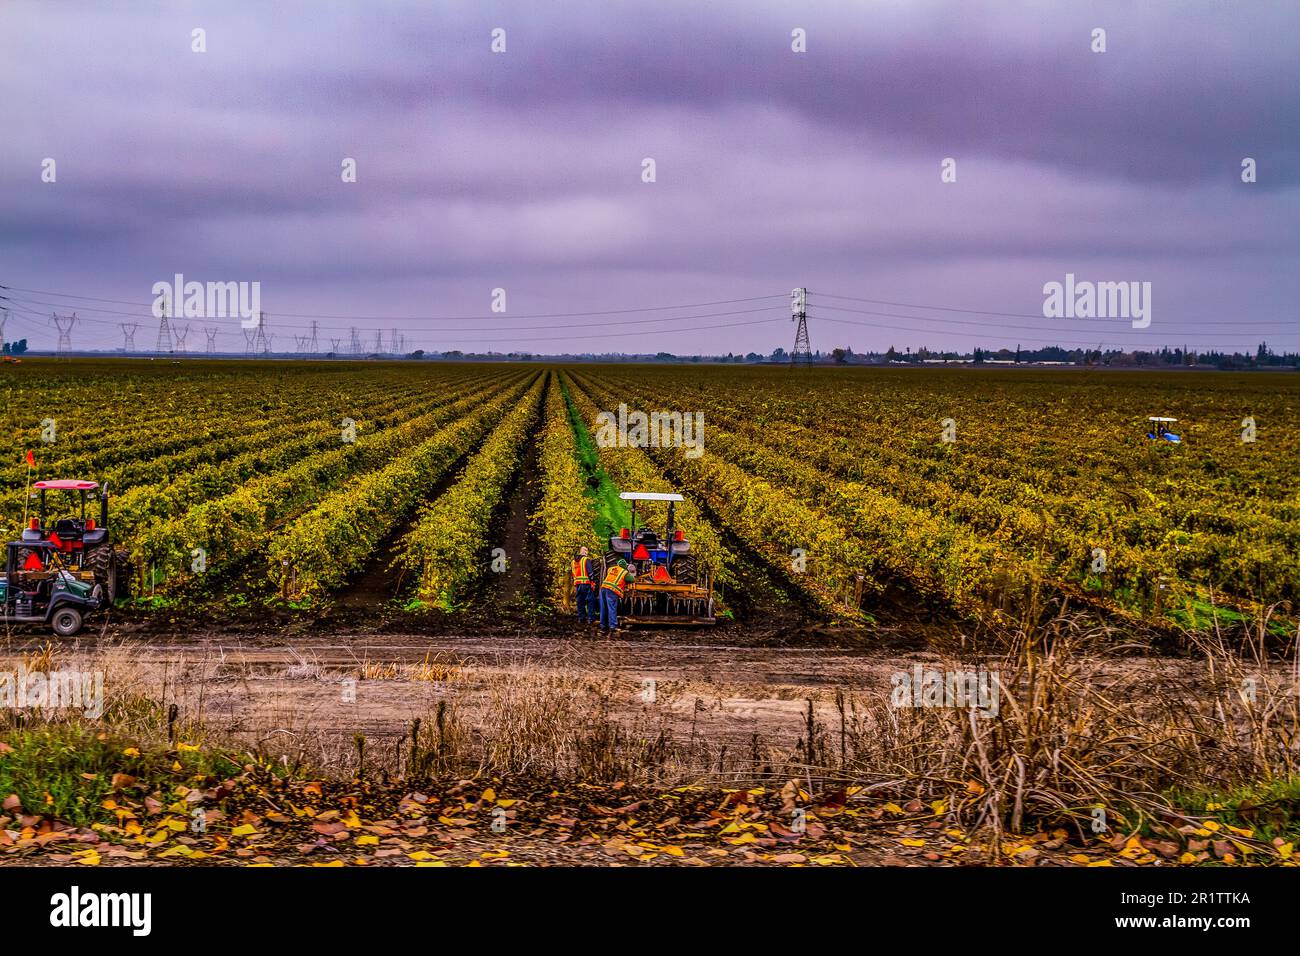 A vineyard in the Lodi region of California with workers and vehicles after the harvest in 2014 Stock Photo